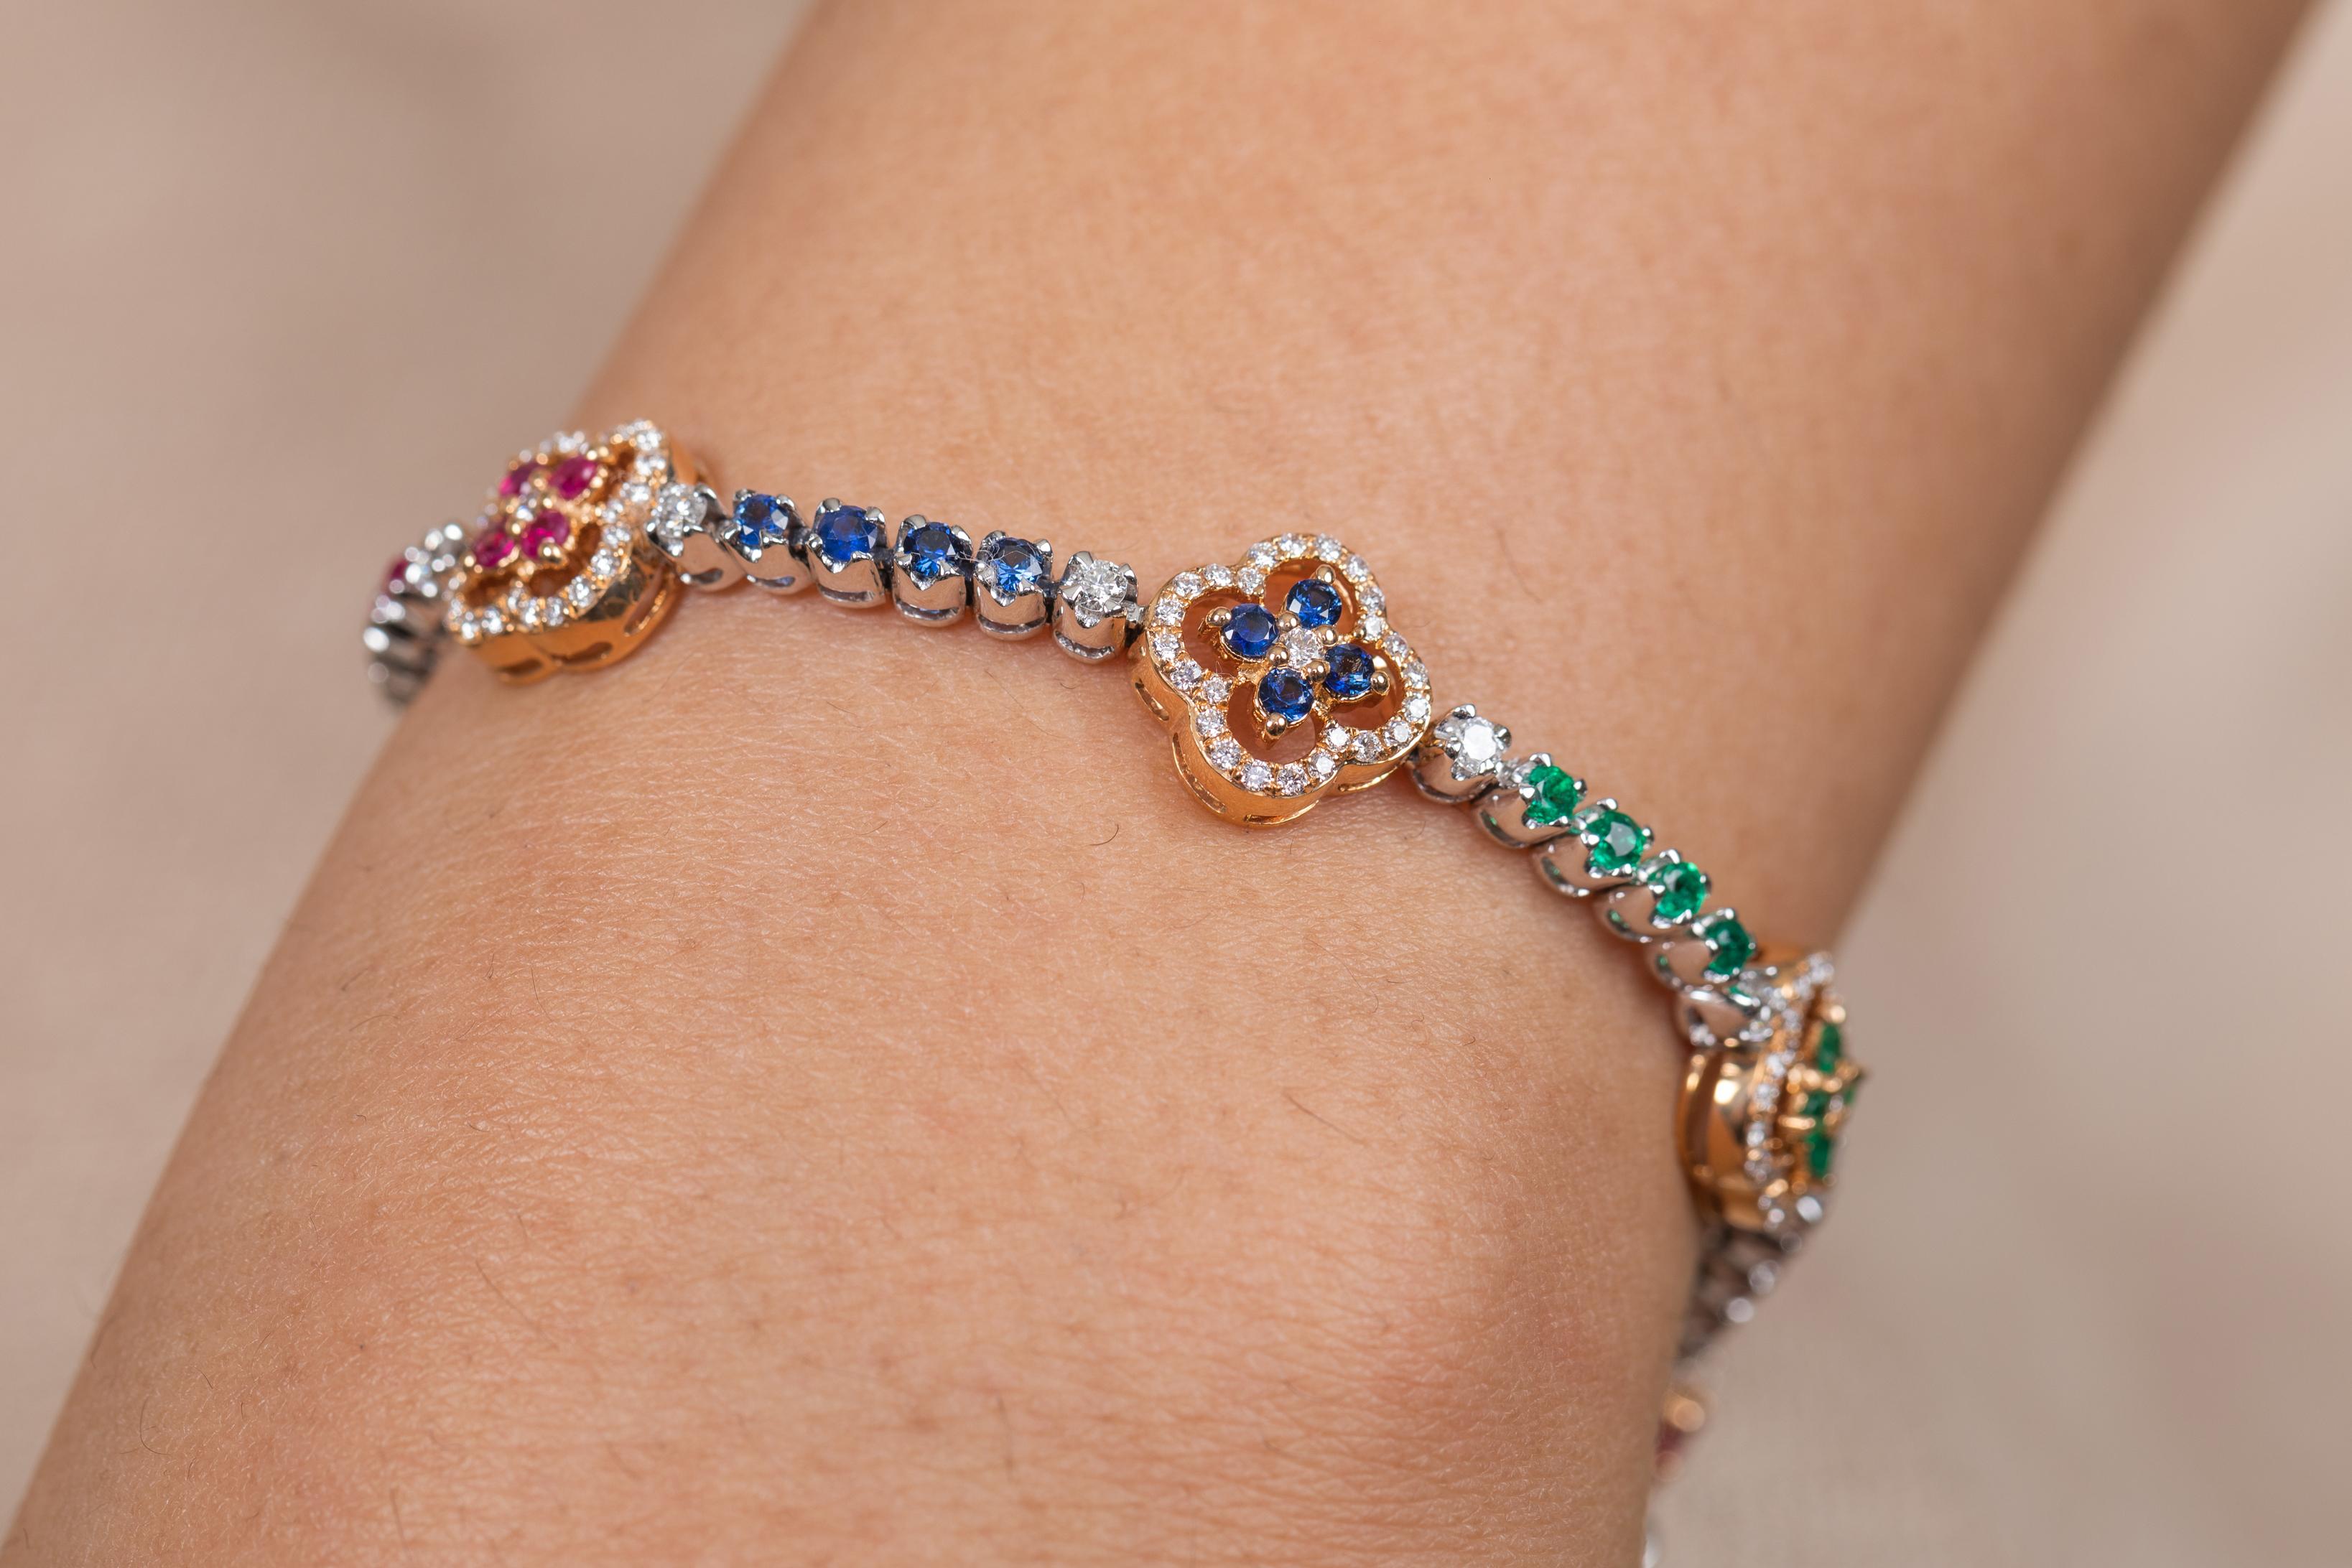 The wearing of charms may have begun as a form of amulet or talisman to ward off evil spirits or bad luck.
This emerald , ruby , blue sapphire bracelet has a round cut gemstone and diamonds in 18K Gold. A perfect piece of jewelry to adorn your